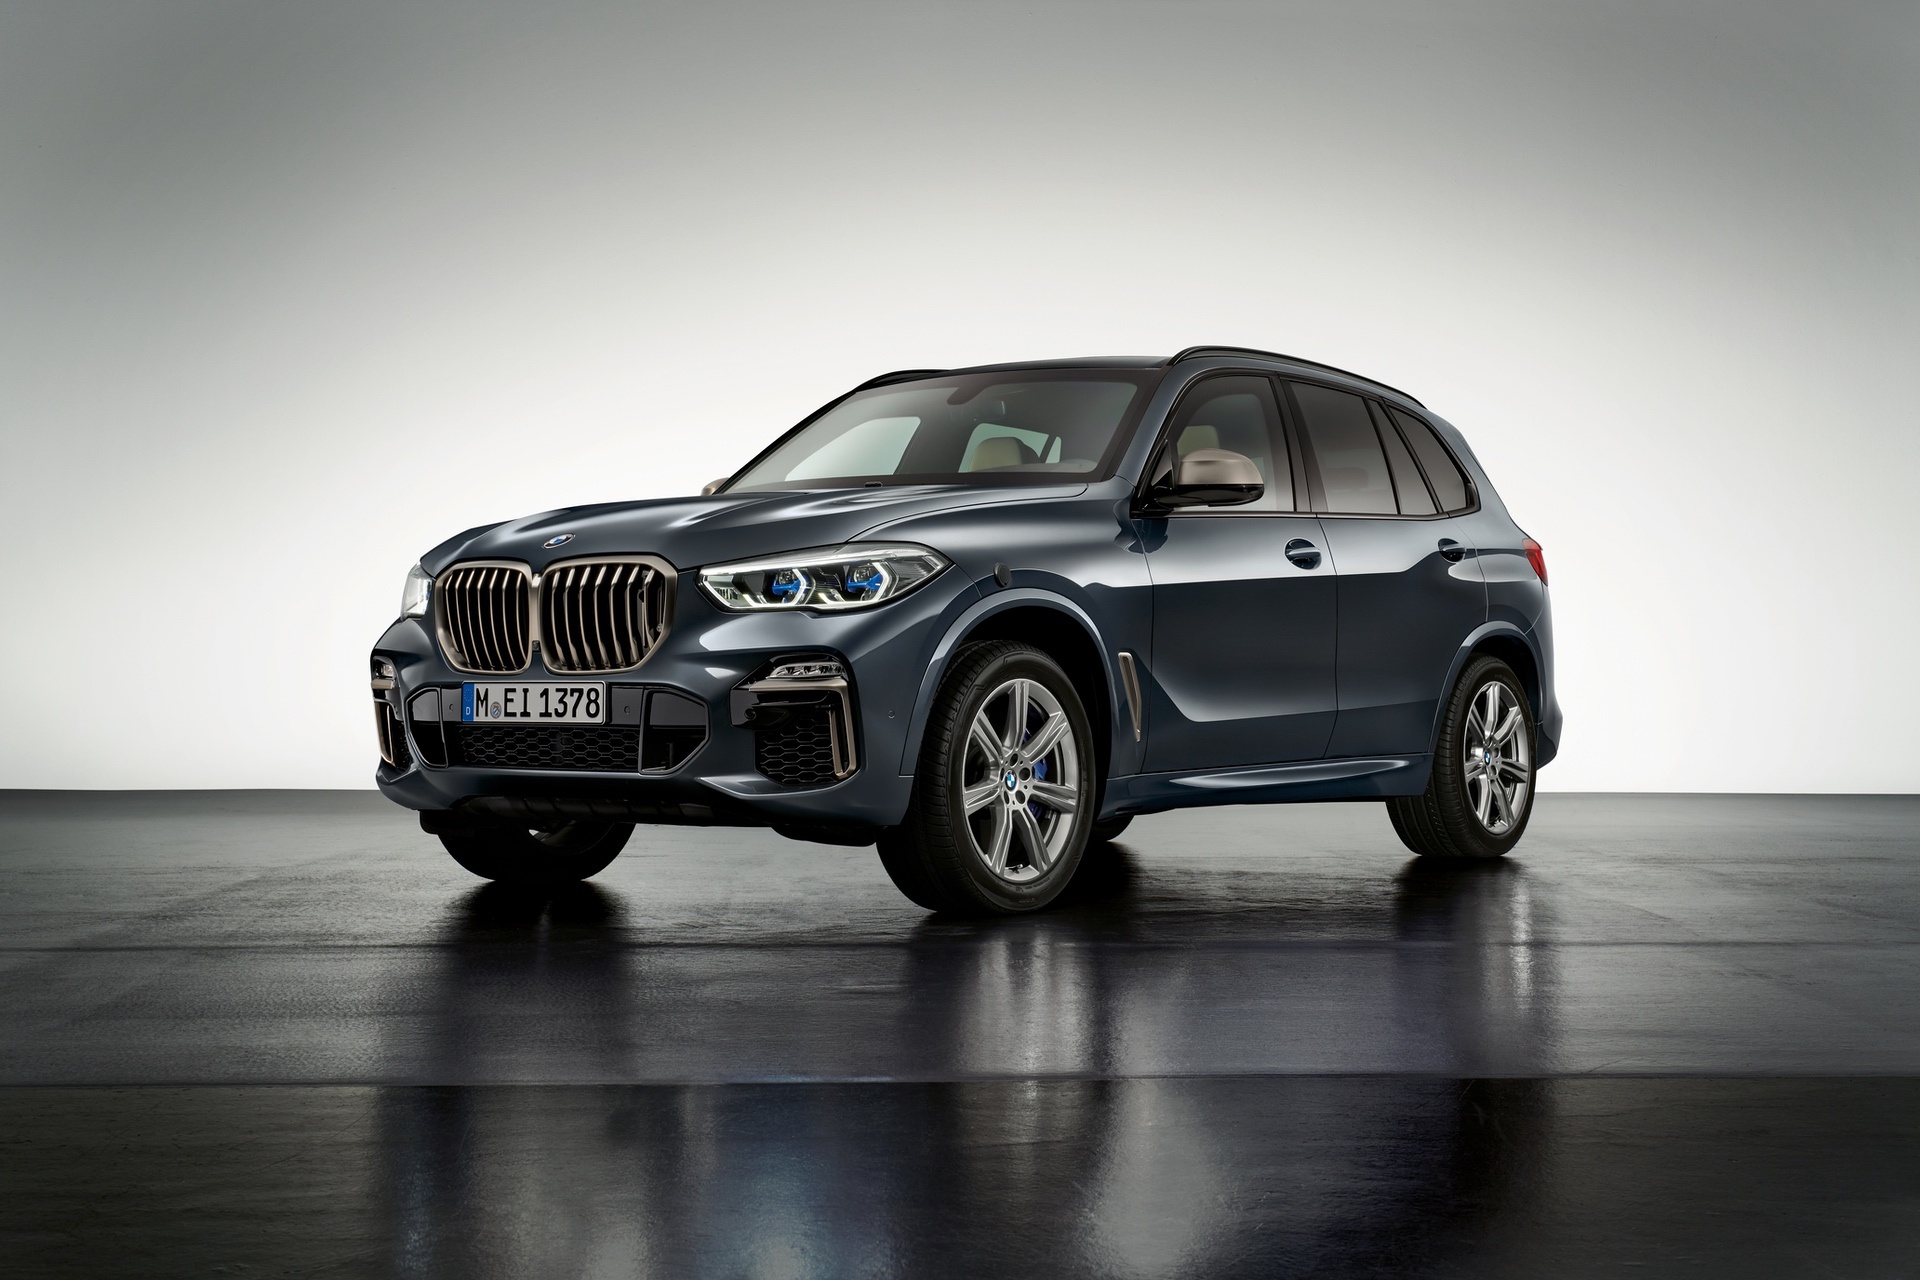 BMW X5, Virtual reality experience, Captivating commercial, Cutting-edge technology, 1920x1280 HD Desktop